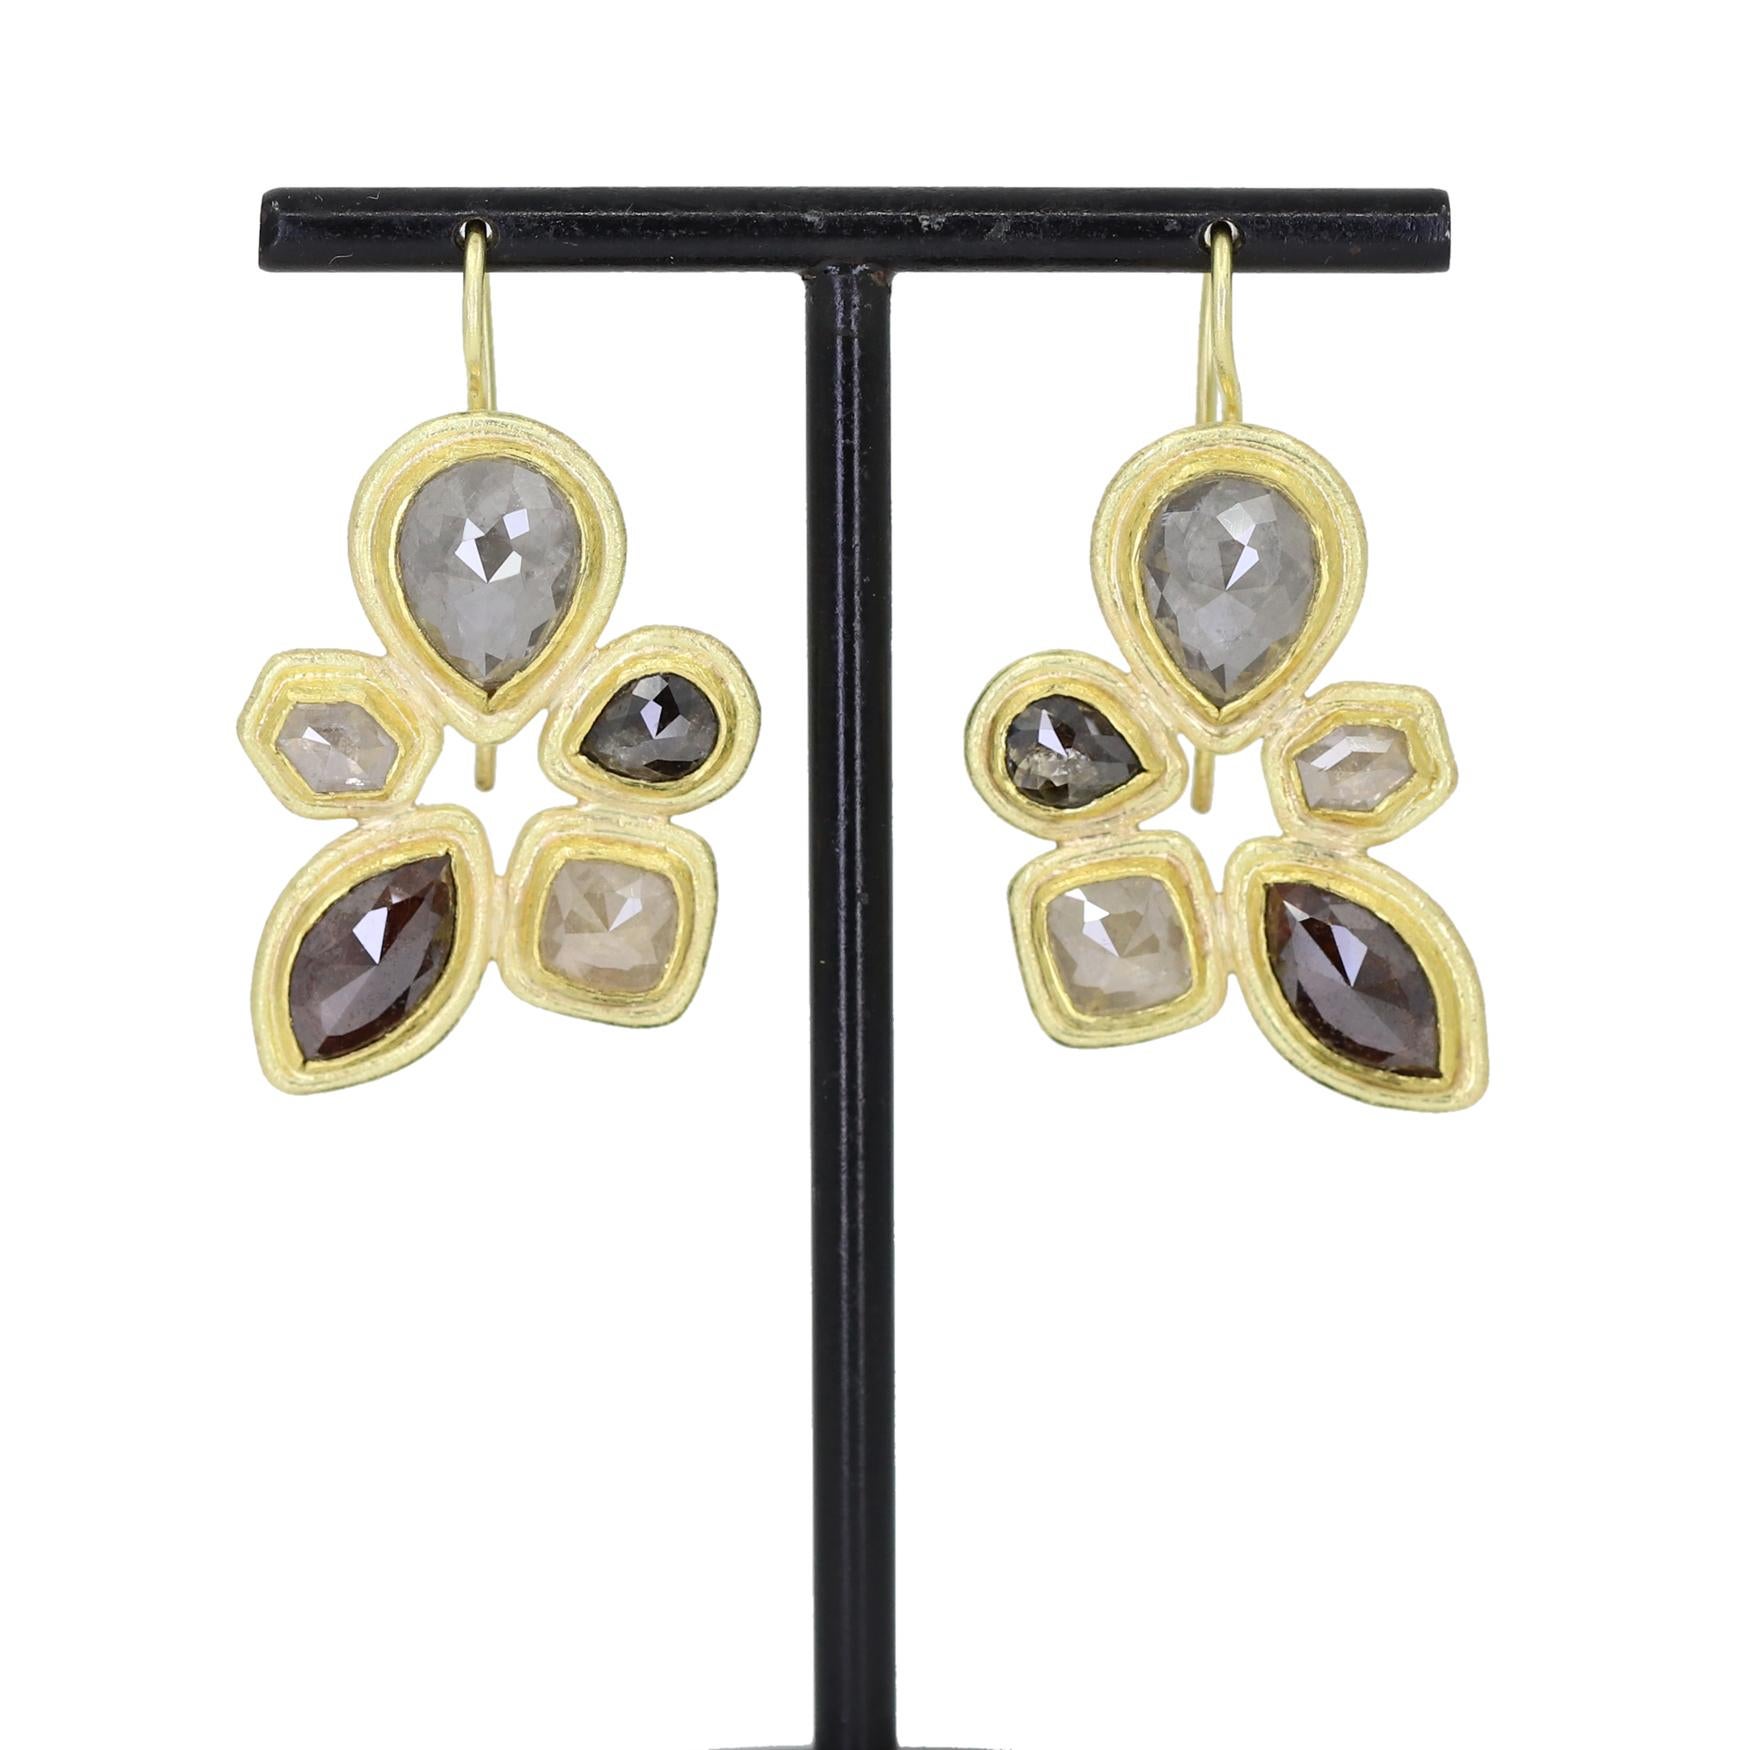 One of a Kind Mosaic Radial Drop Earrings hand-fabricated by acclaimed jewelry maker Petra Class in her signature-finished 22k yellow gold featuring assorted natural rose-cut diamonds and finished on 18k gold ear wires with spring closure. Each